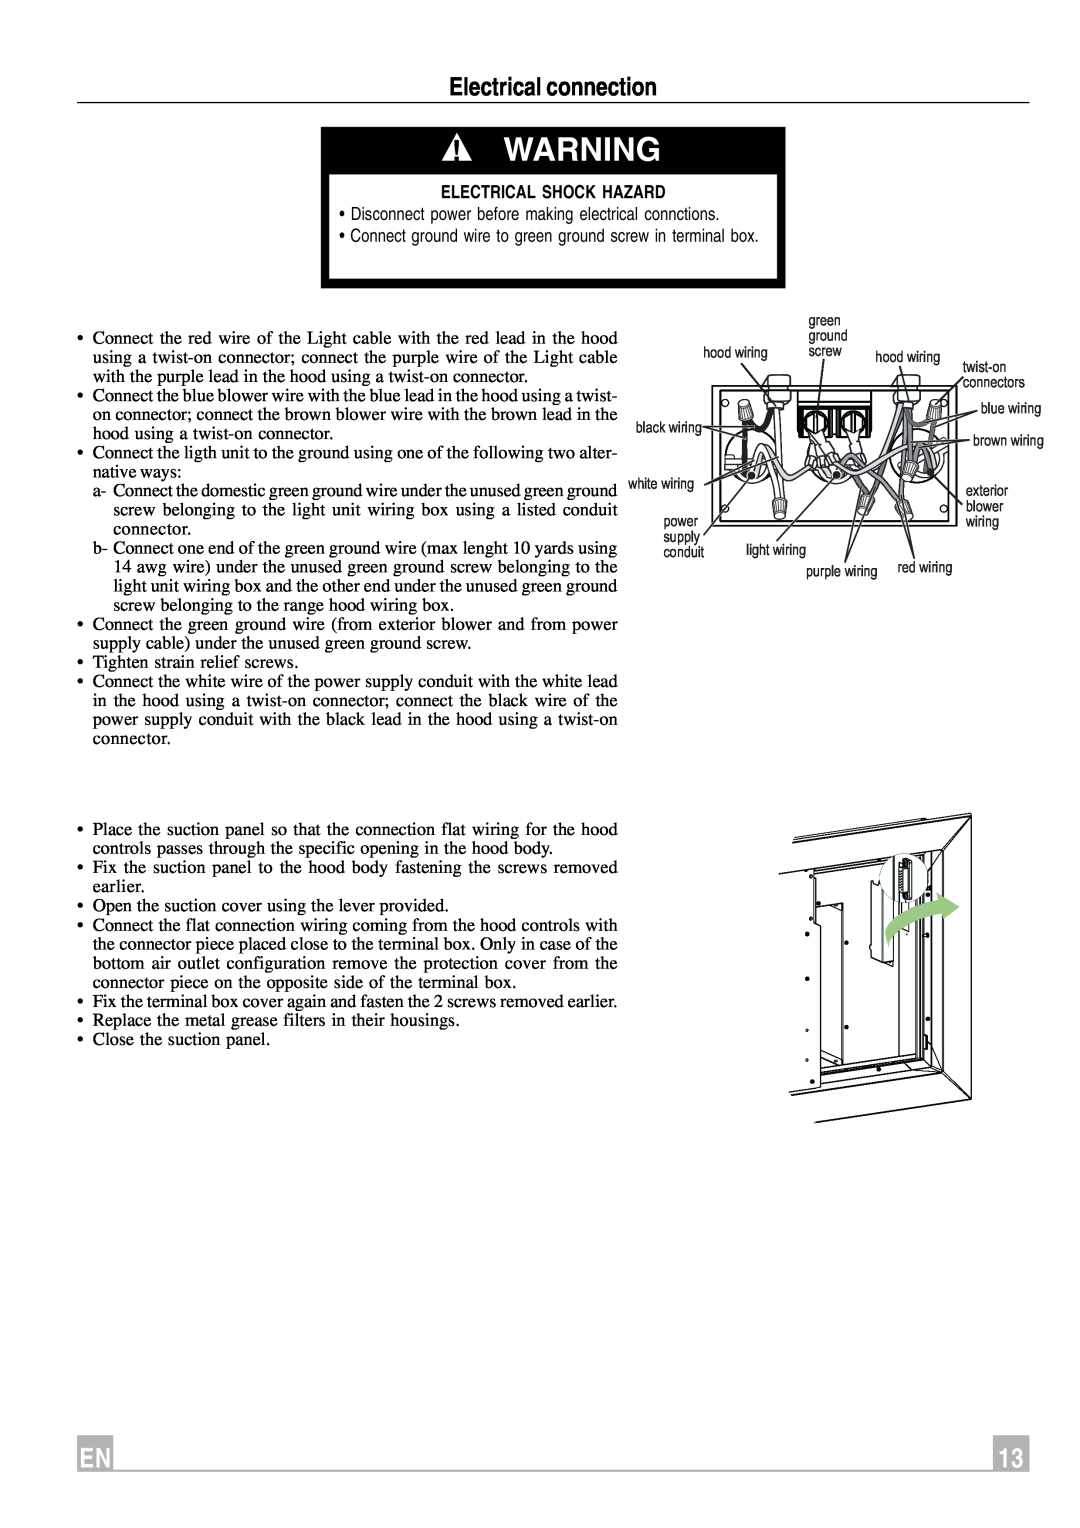 Faber Remote Blower instruction manual Electrical connection, Electrical Shock Hazard 